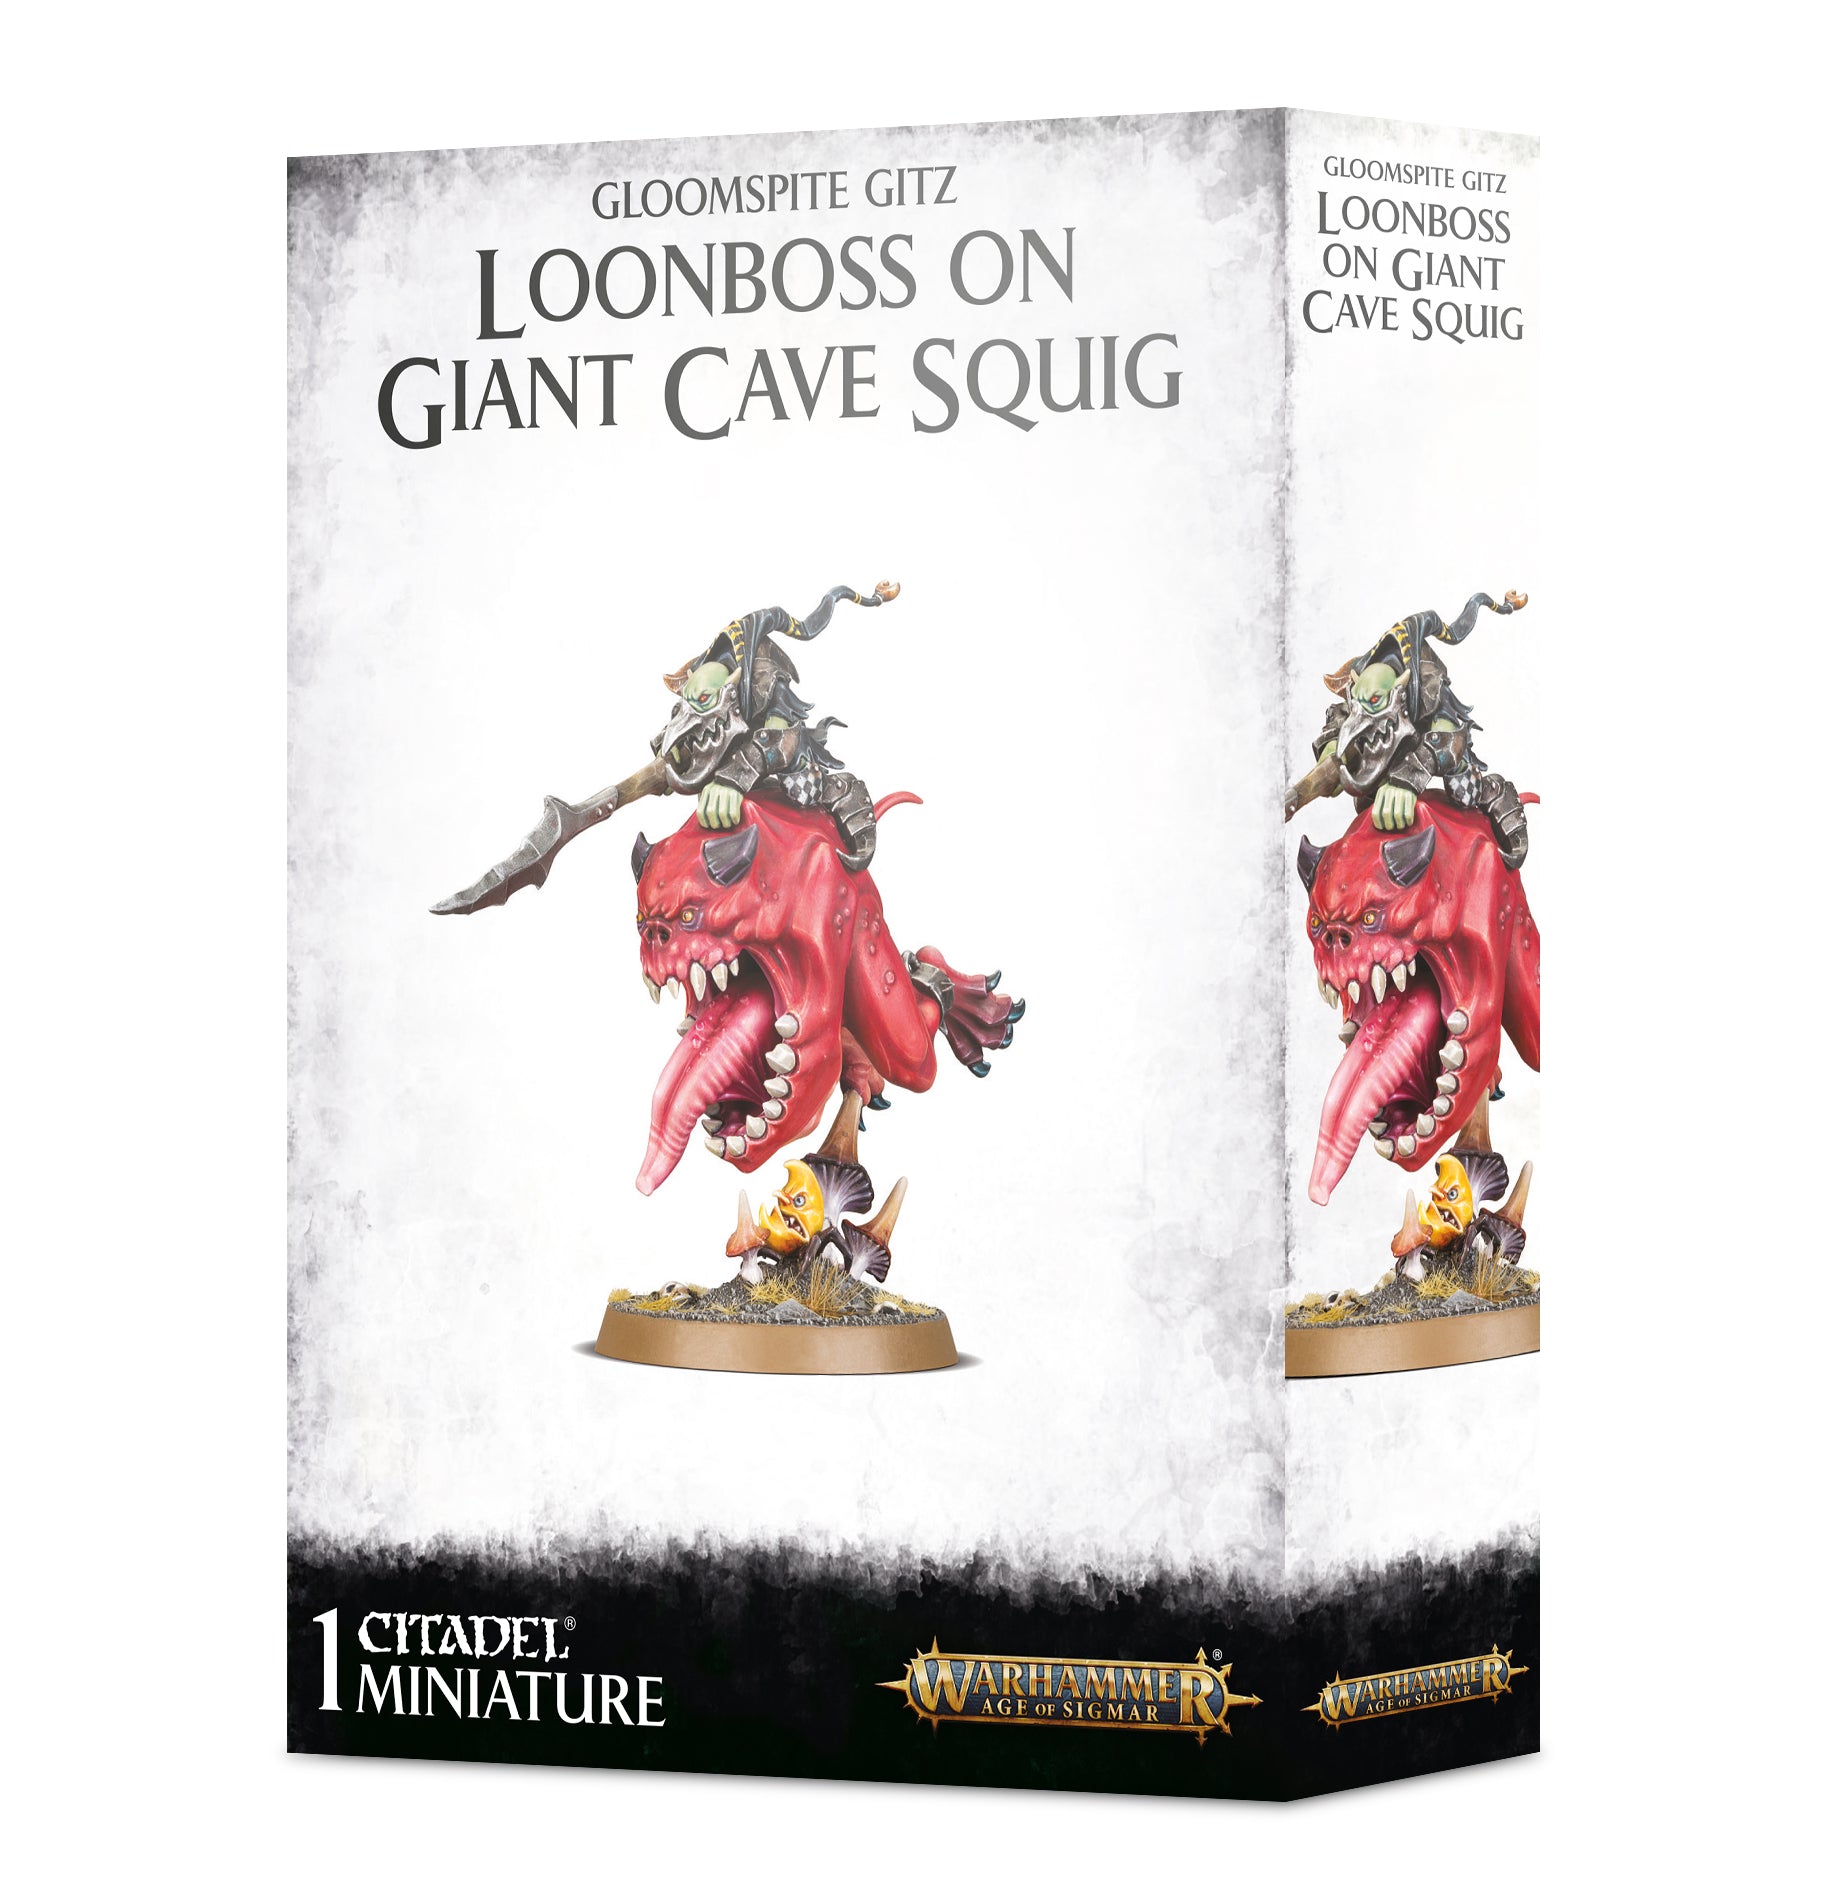 Warhammer Age of Sigmar Loonboss on Giant Cave Squig